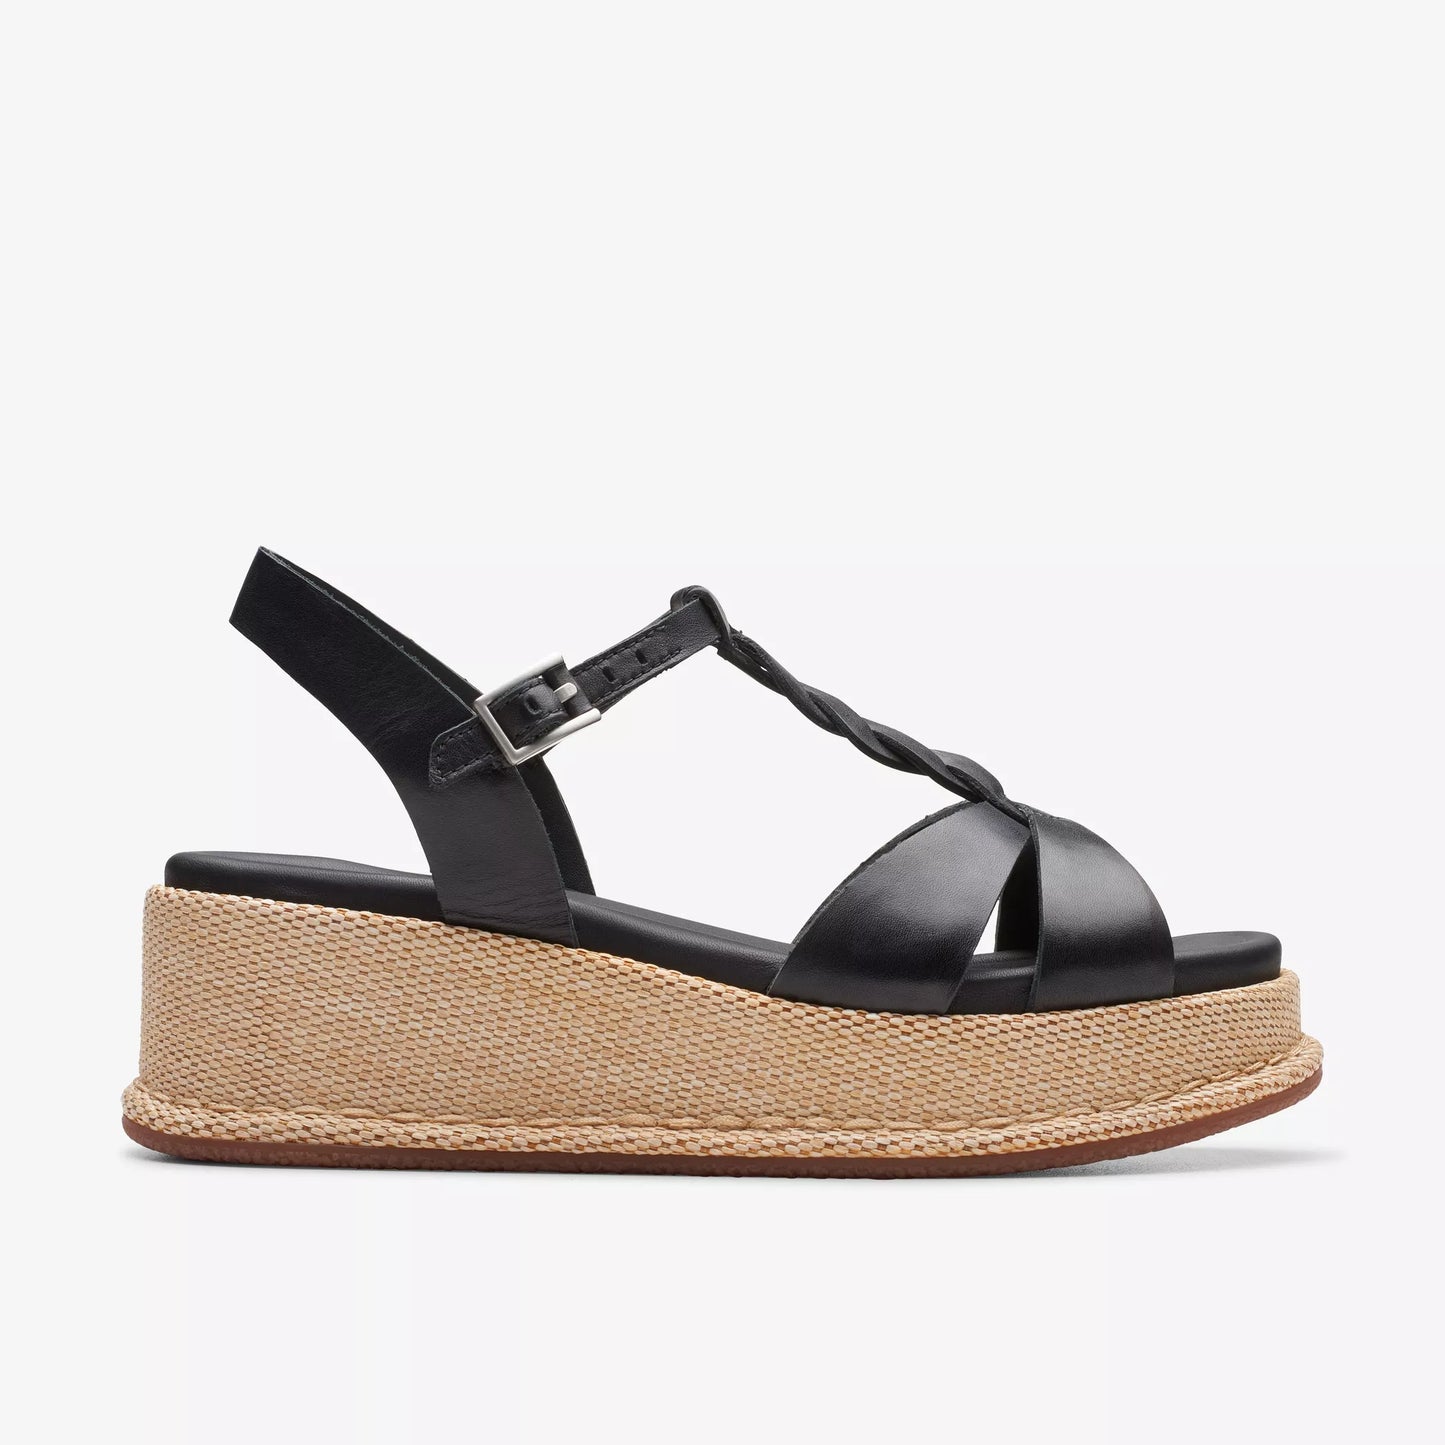 Side view of the Black Leather Kimmei Twist Wedge by Clarks